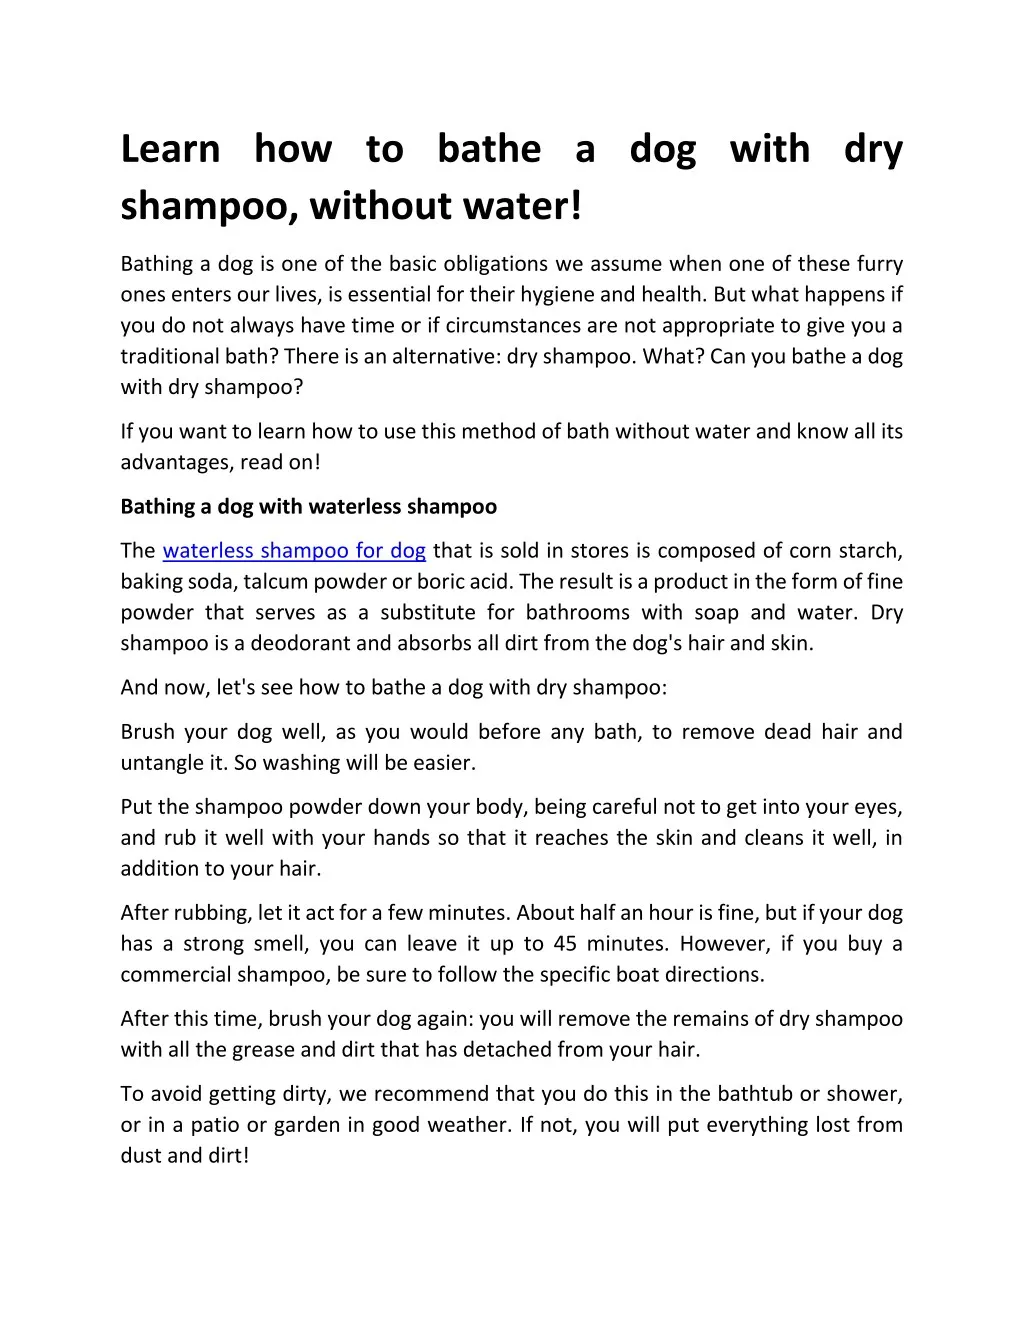 learn how to bathe a dog with dry shampoo without